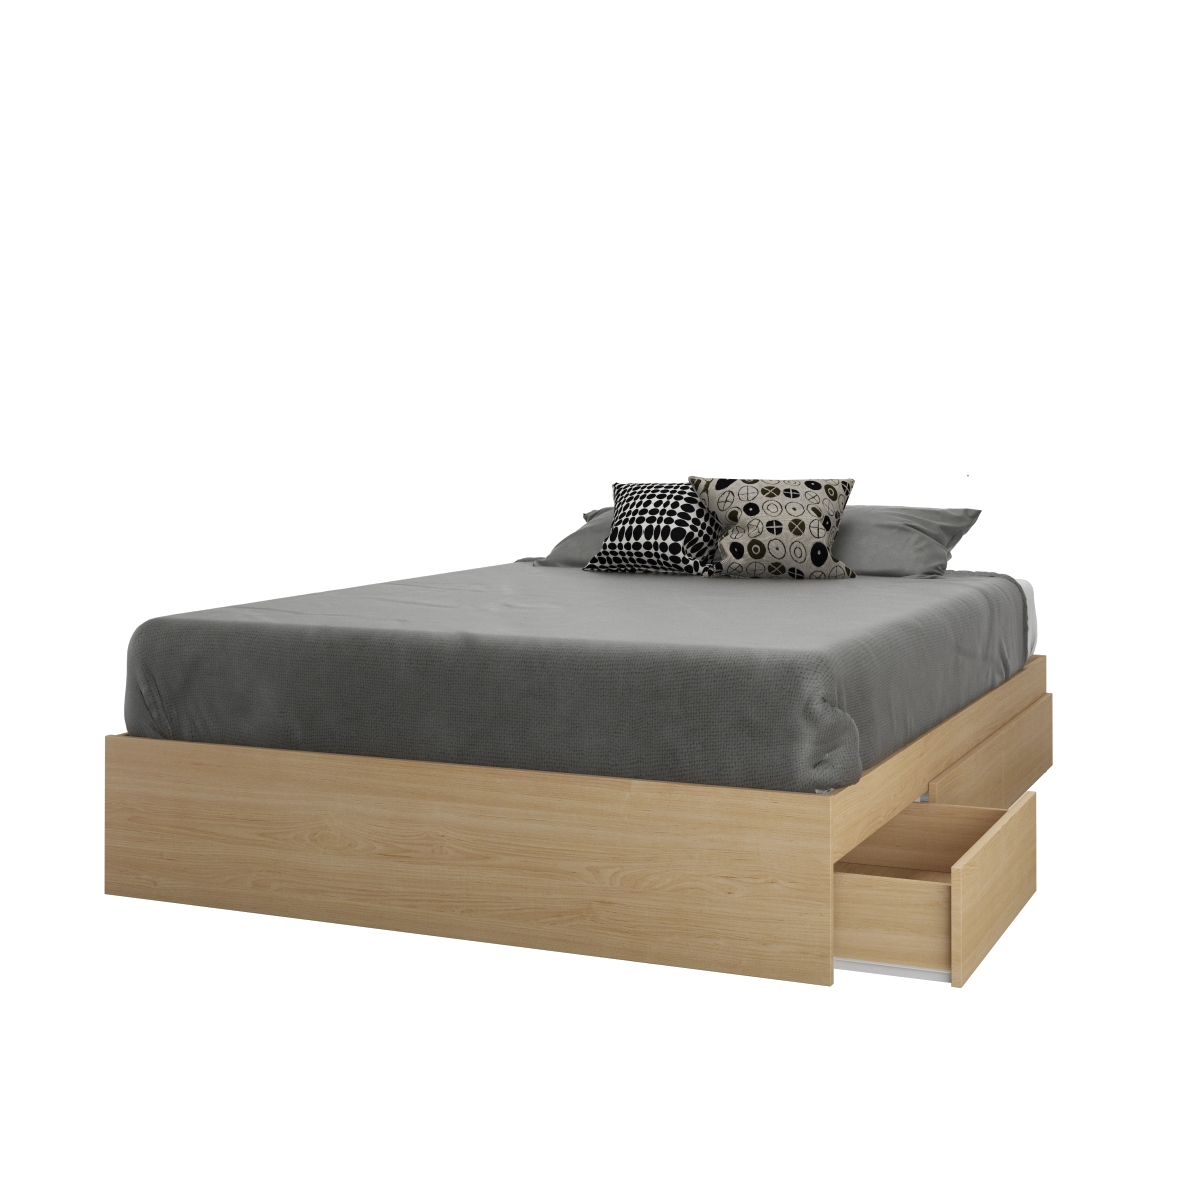 Nomad Complete Bed Bundle With Vanity, Natural Maple Laminate - Full Size